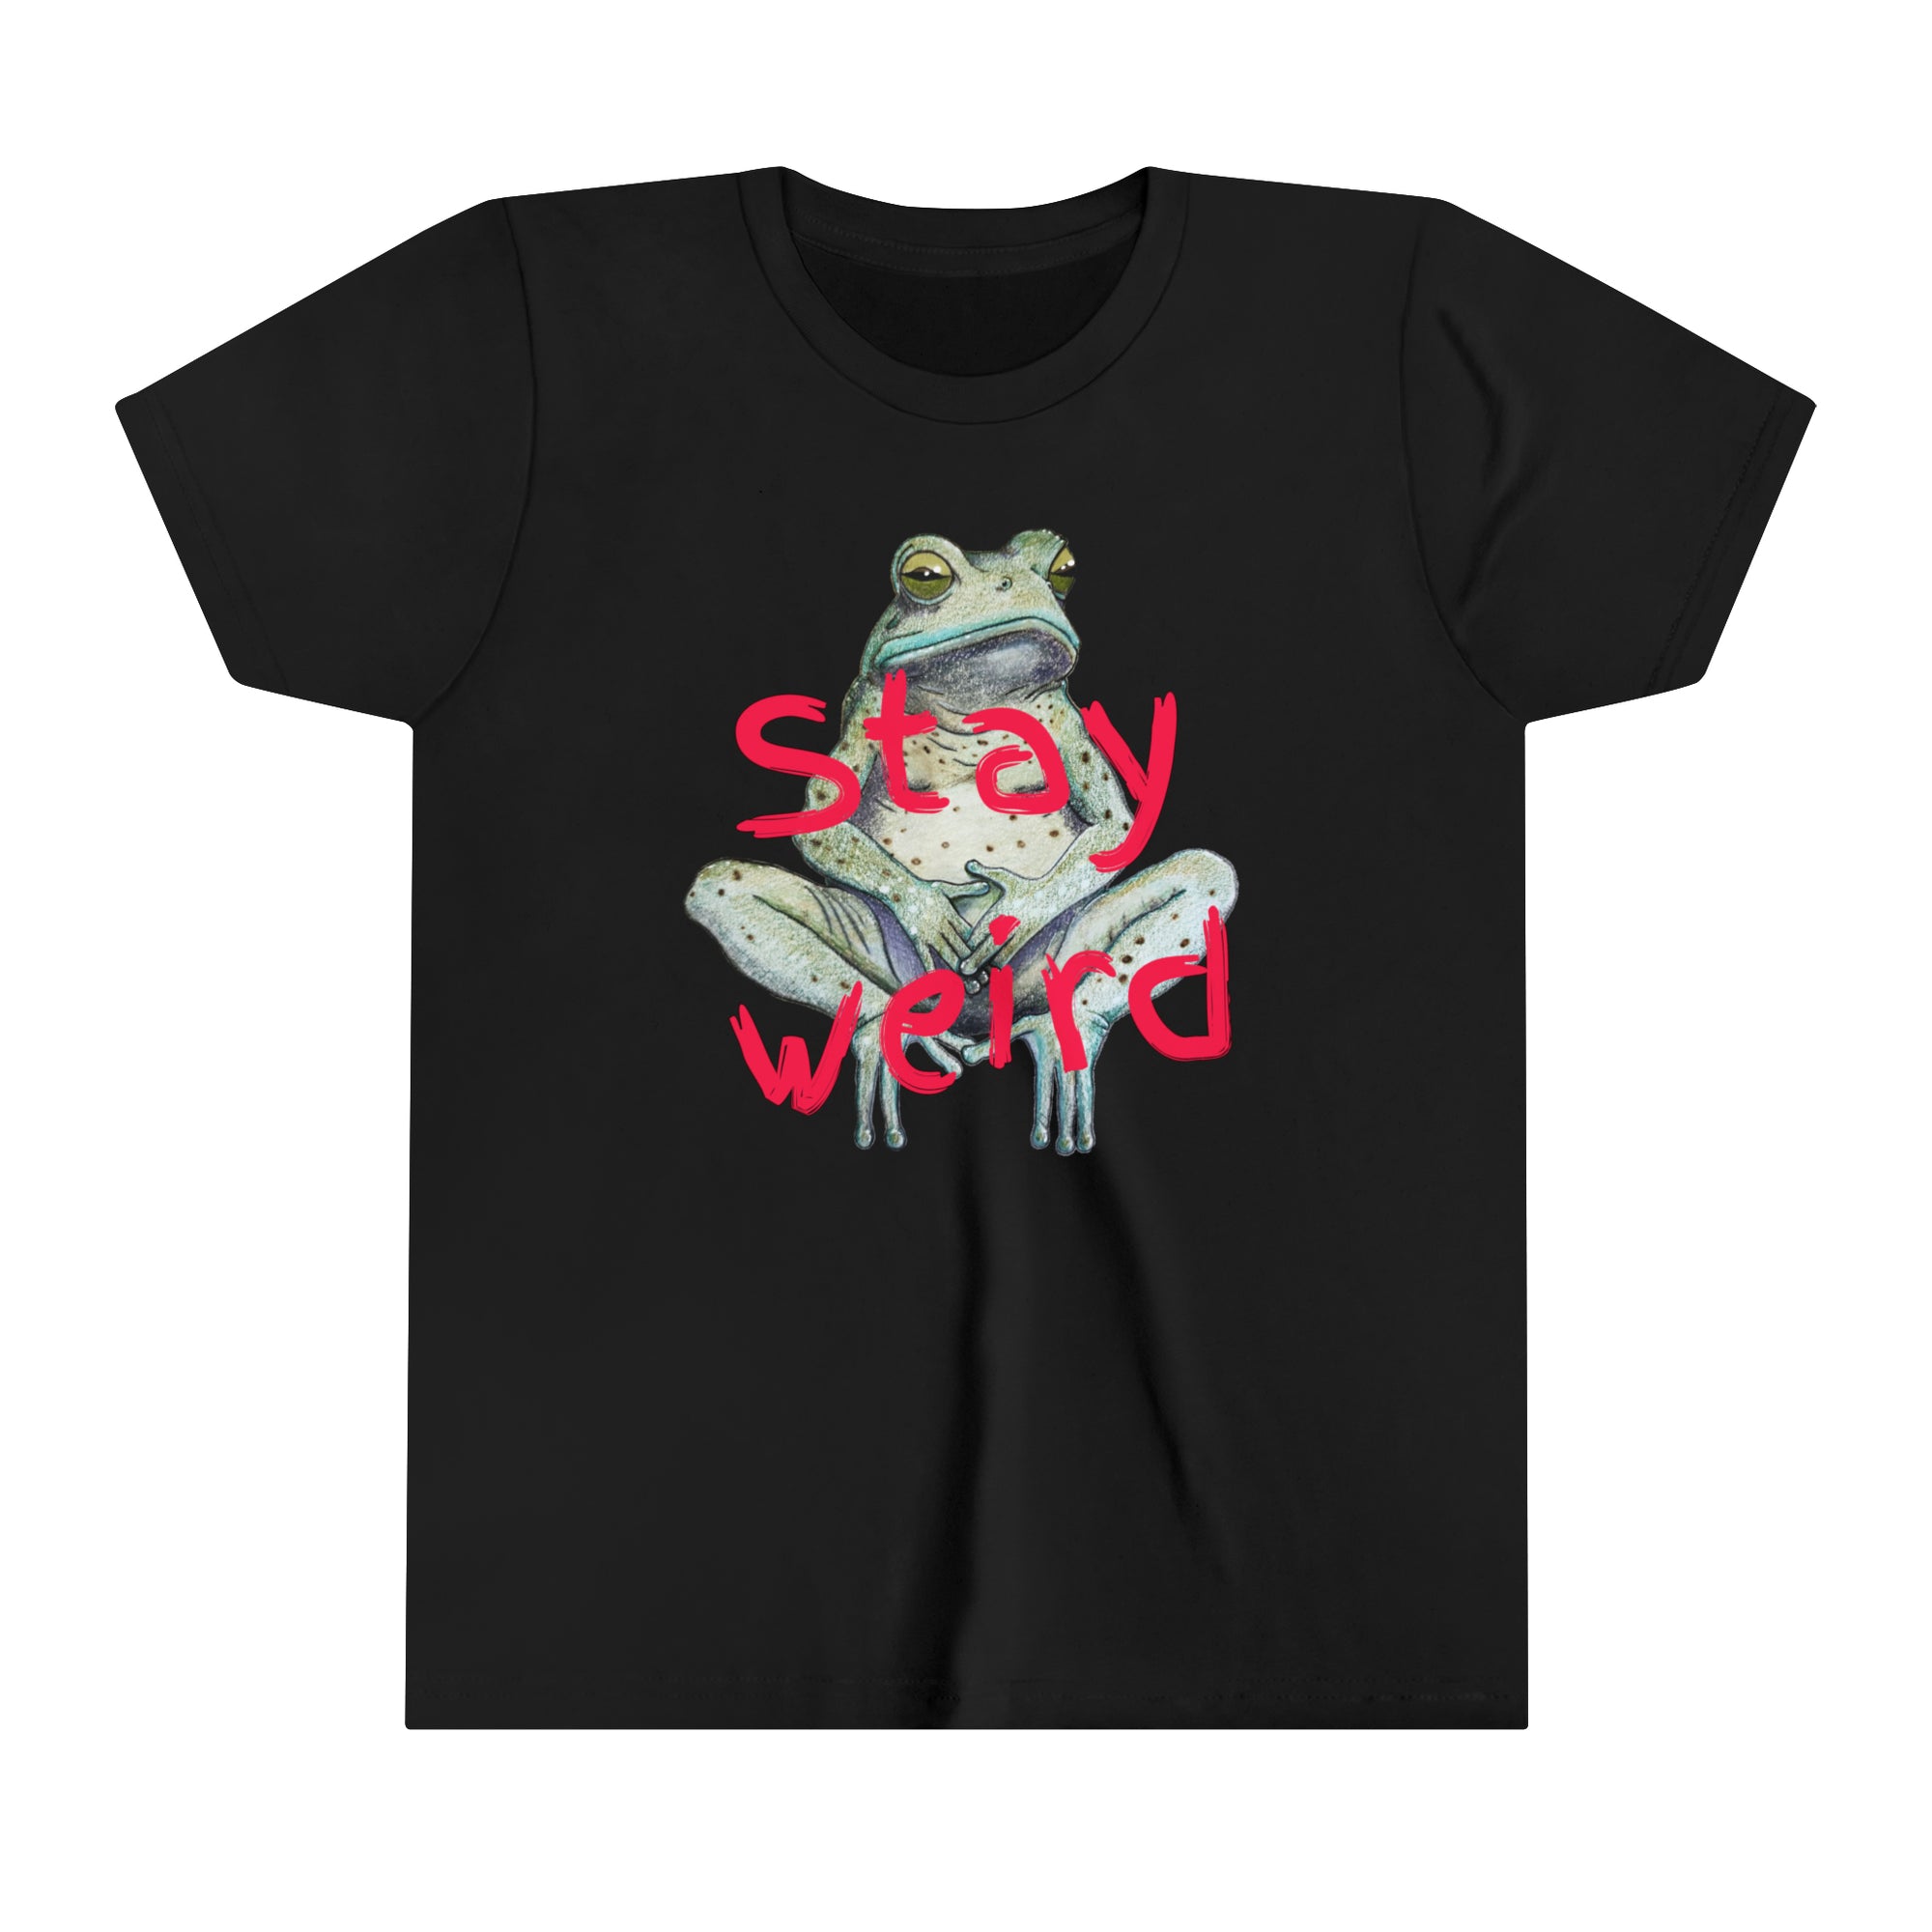 Stay Weird Youth Tee